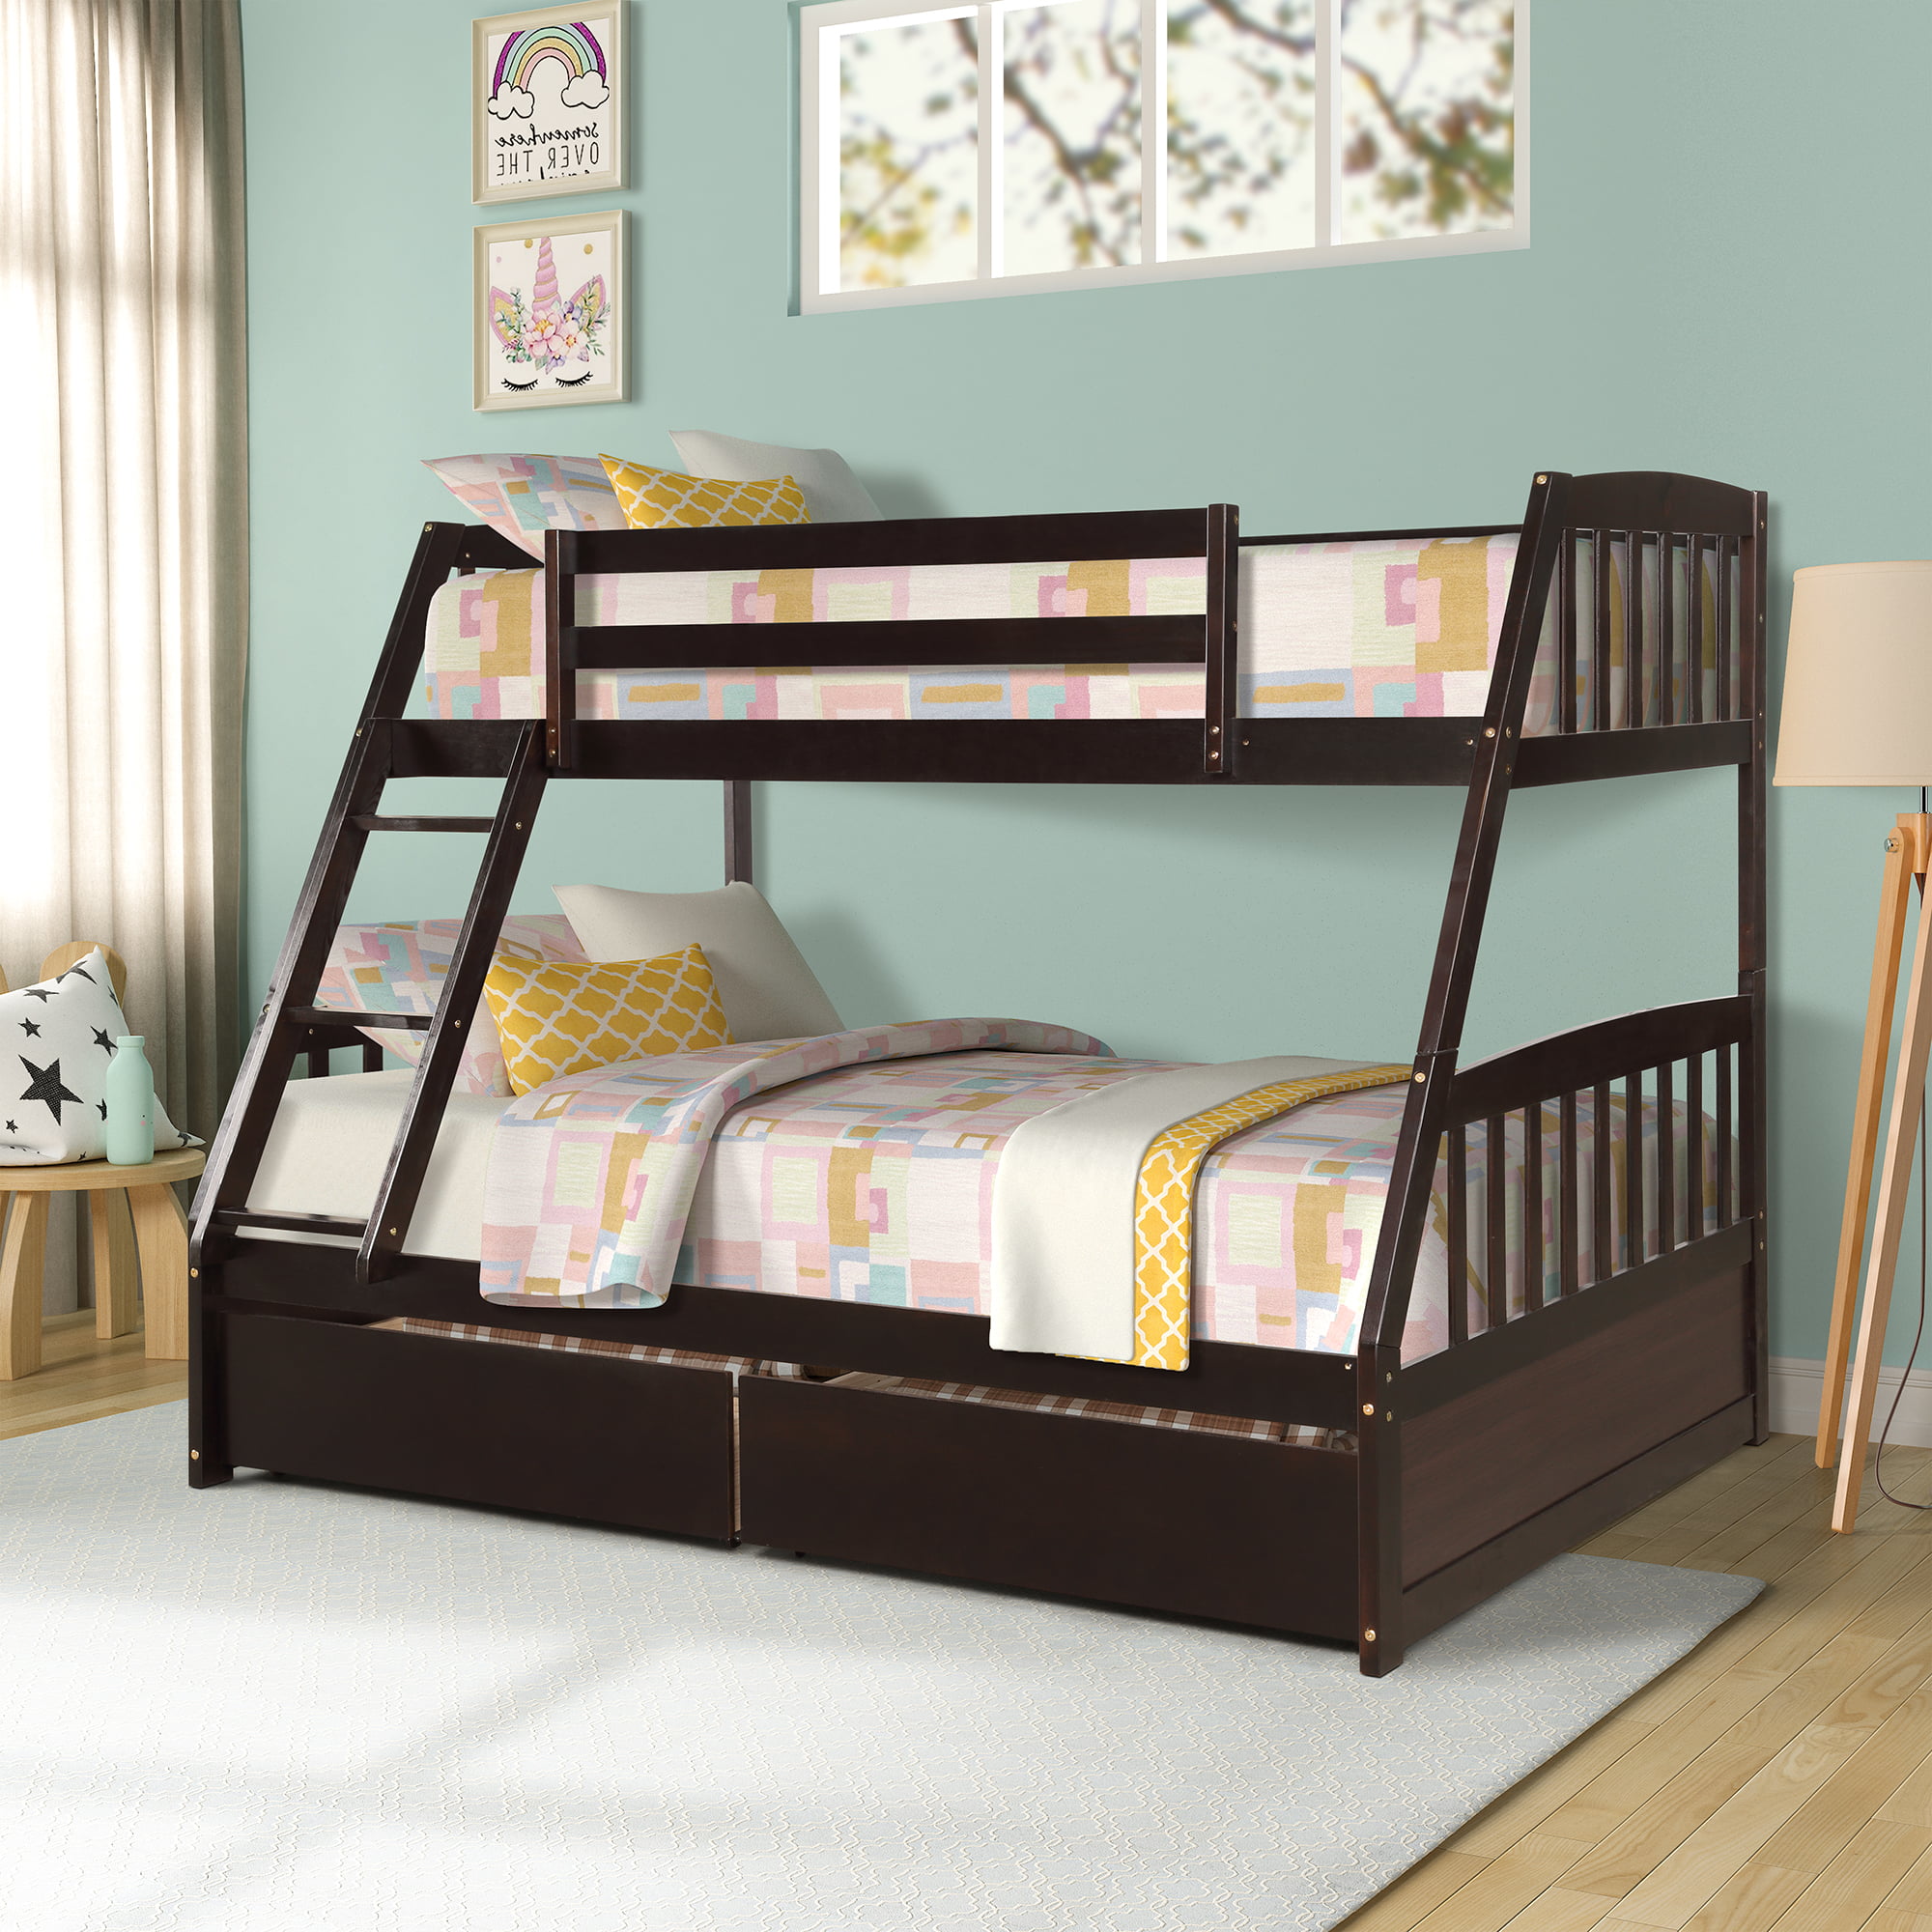 Solid Wood Bunk Bed Frame, Twin Over Full Bunk Bed With Storage Ladder